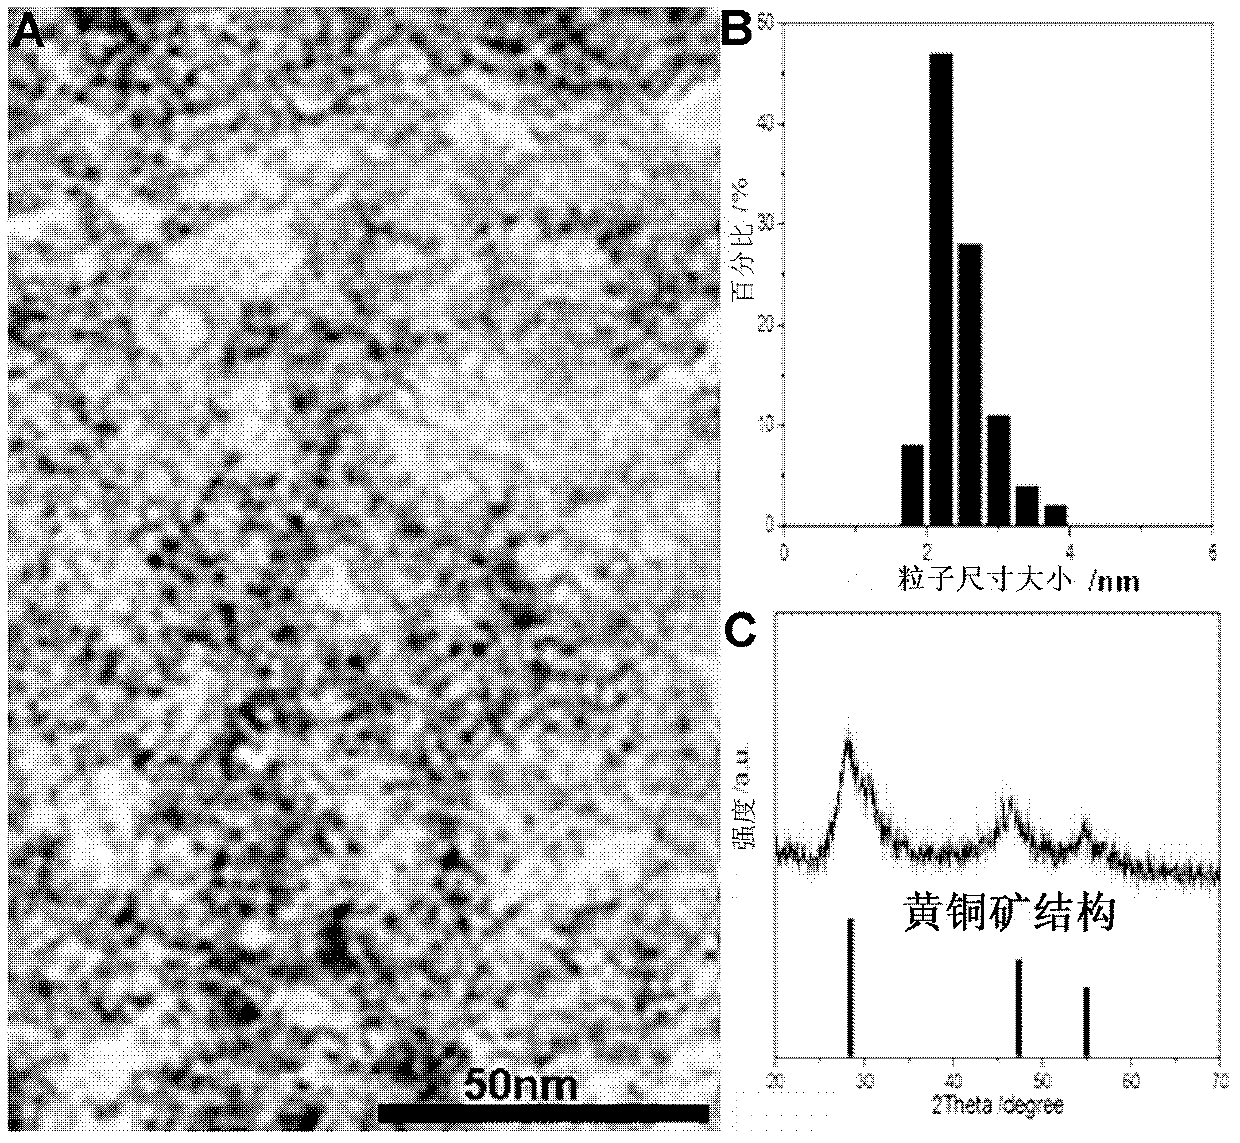 Hydro-thermal preparation method for novel near infrared water-soluble copper-indium-sulfur three-element quantum dots